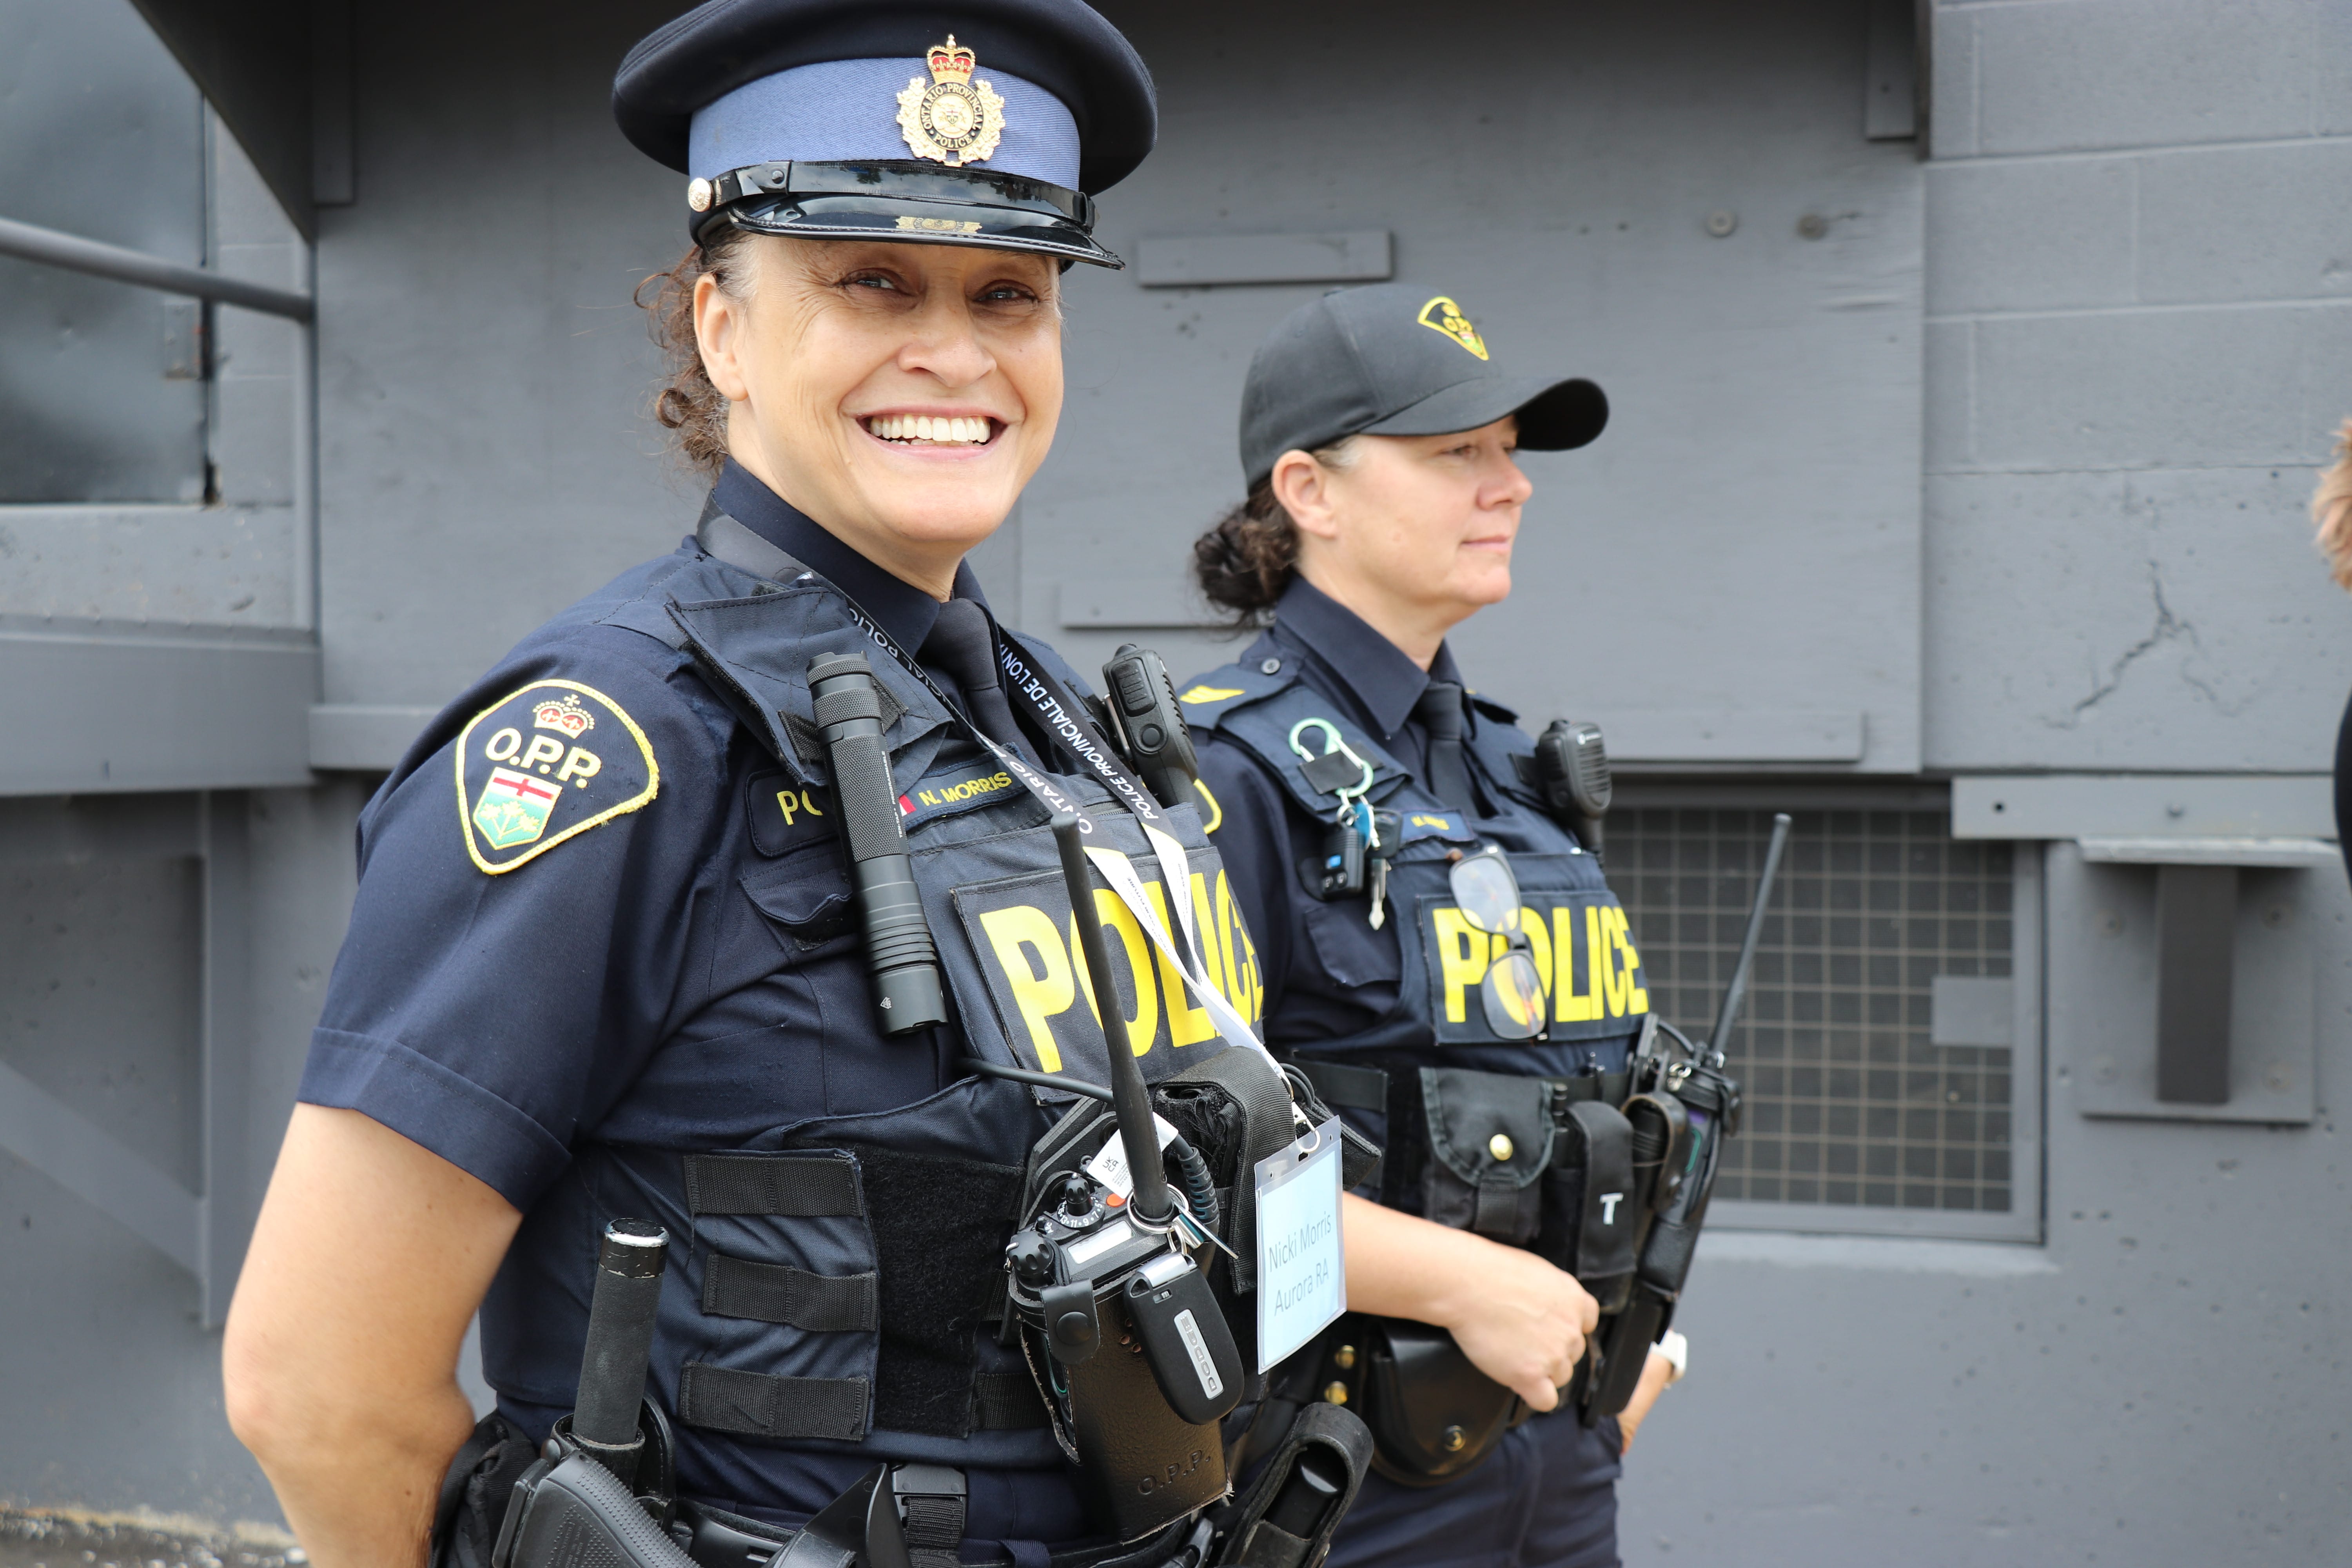 an officer smiling in a relaxed stance